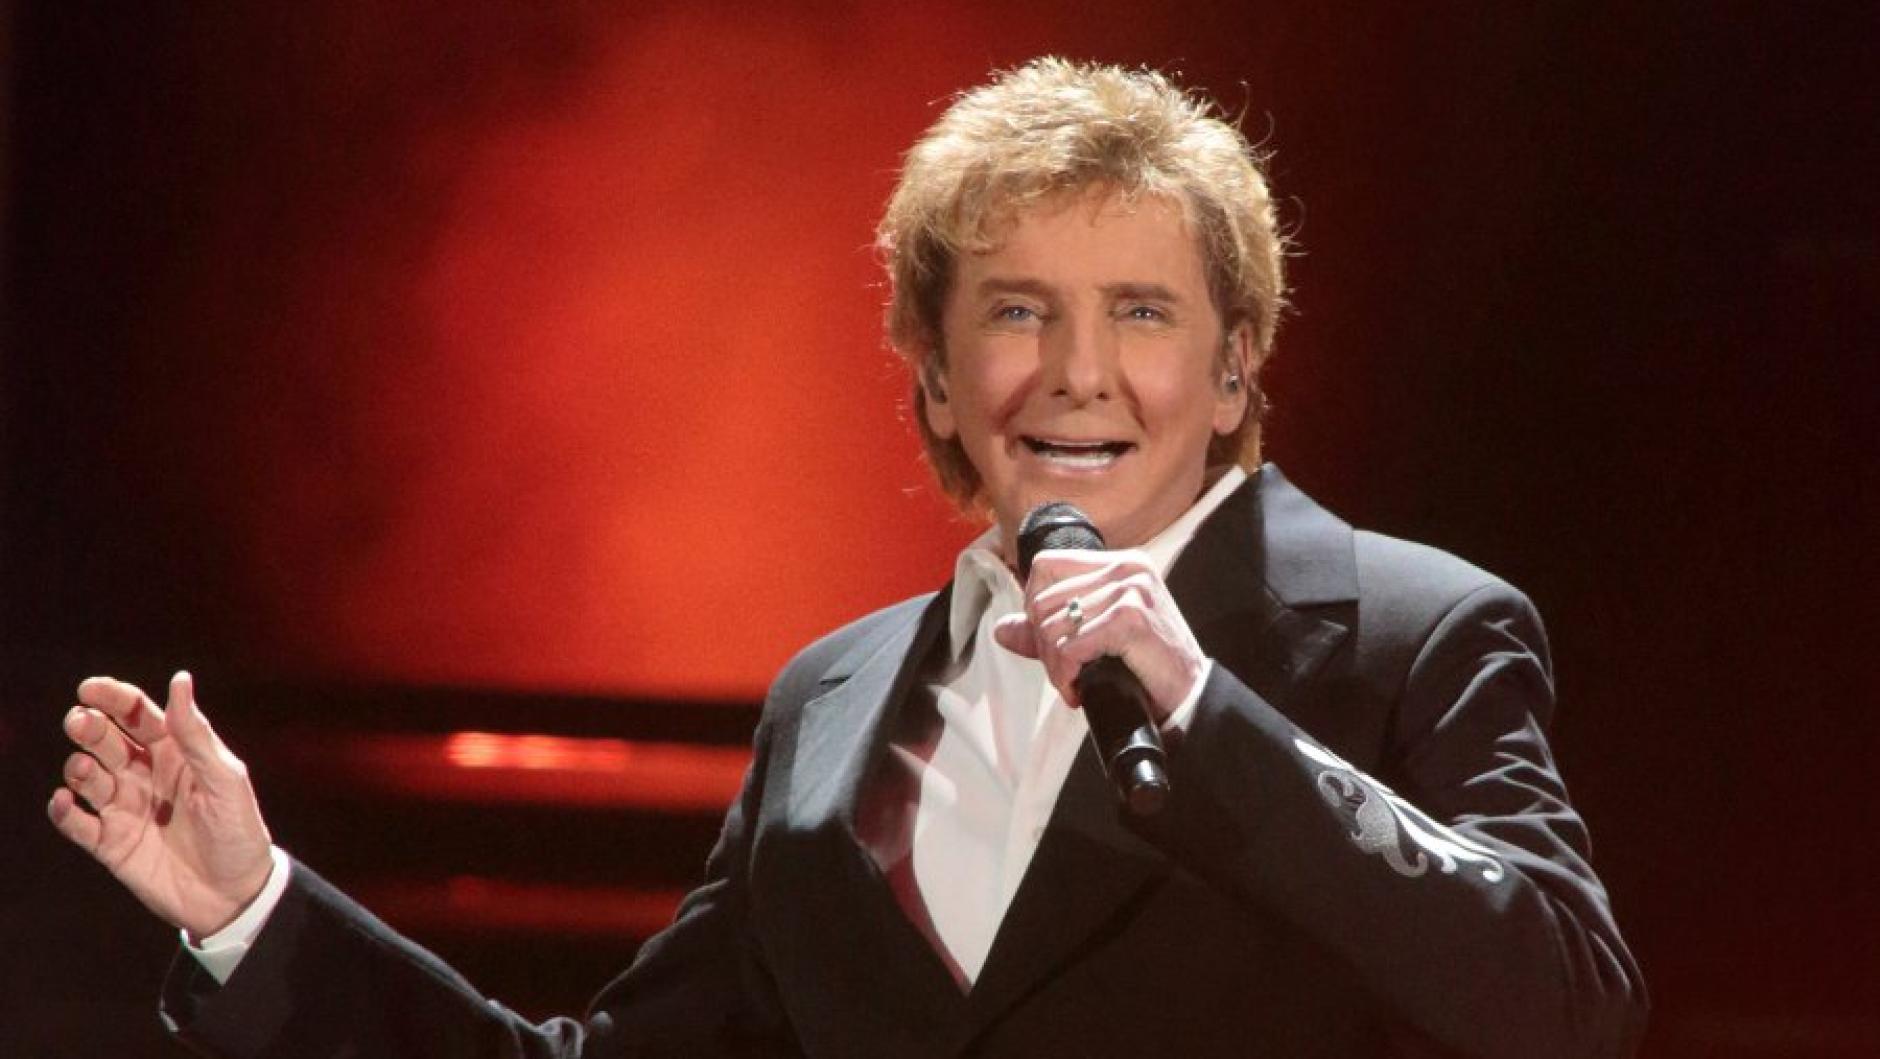 Coming Out: Schmusesänger Barry Manilow outet sich mit 73 ...